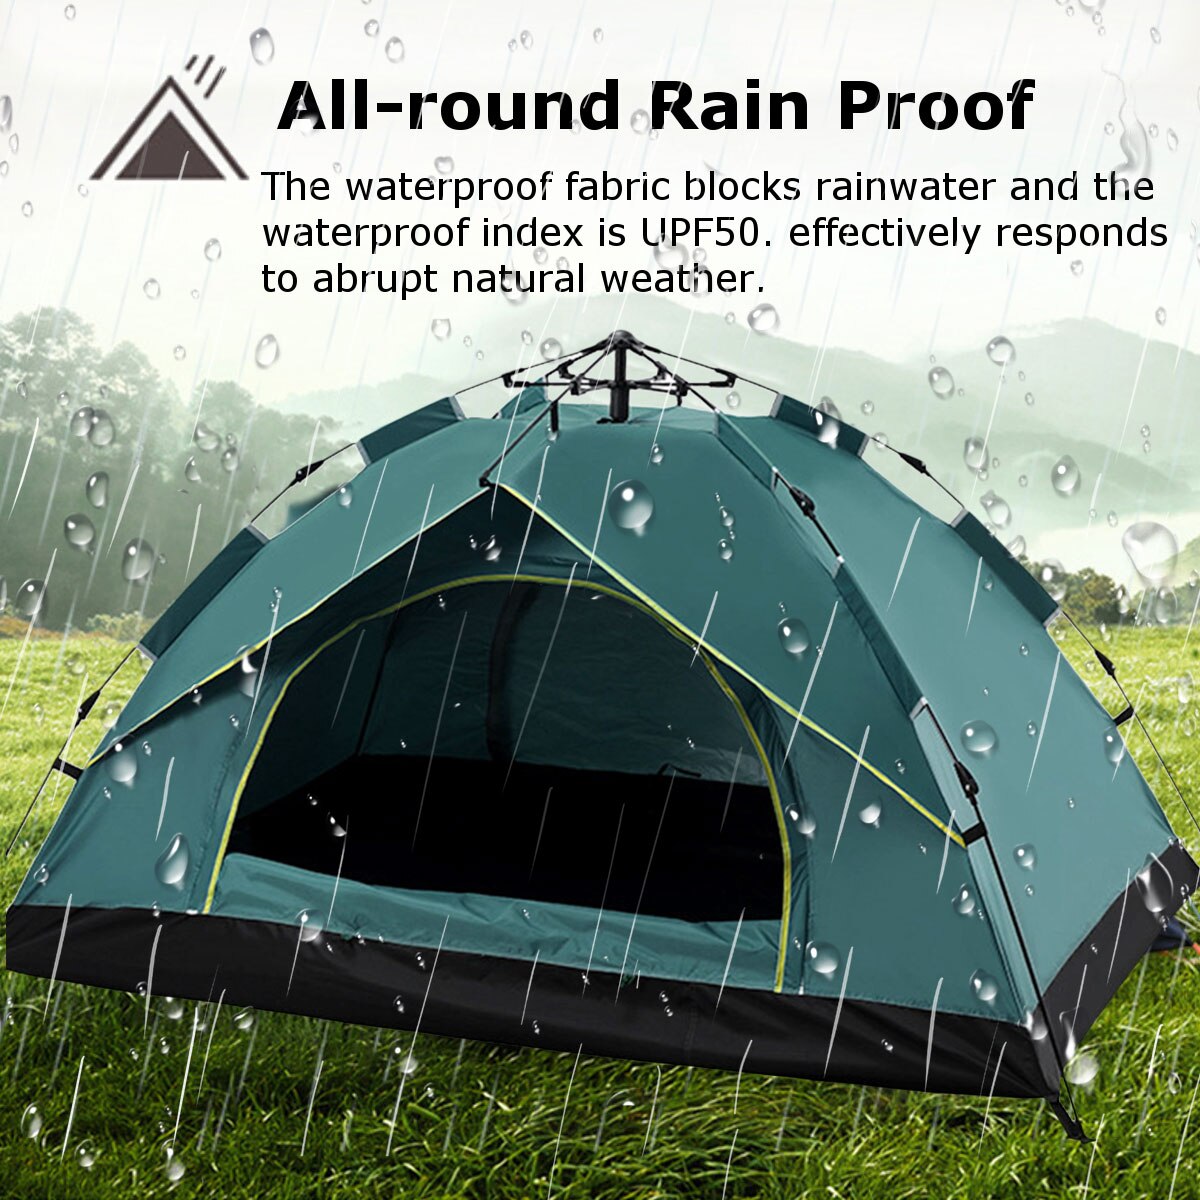 Cheap Goat Tents 3 4 Person Automatic Camping Tent Family Tent Instant Setup Awning Outdoor Protable Backpacking Tent Hiking Travel 210D Oxford   